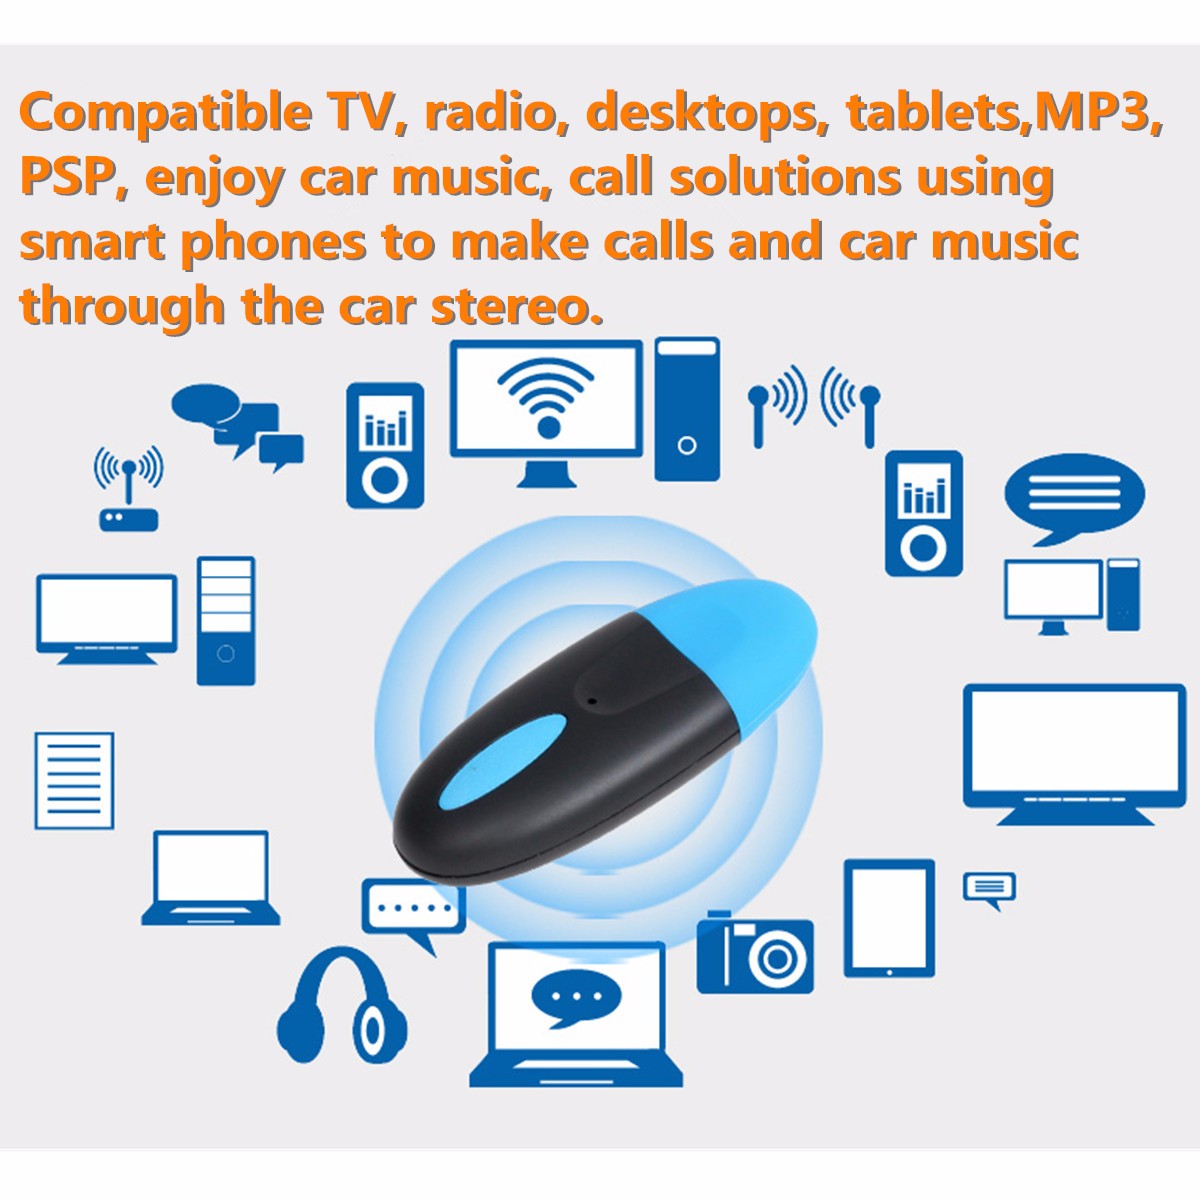 bluetooth-41-Wireless-35mm-Audio-Stereo-Music-Speaker-Receiver-Adapter-Dongle-1175134-3